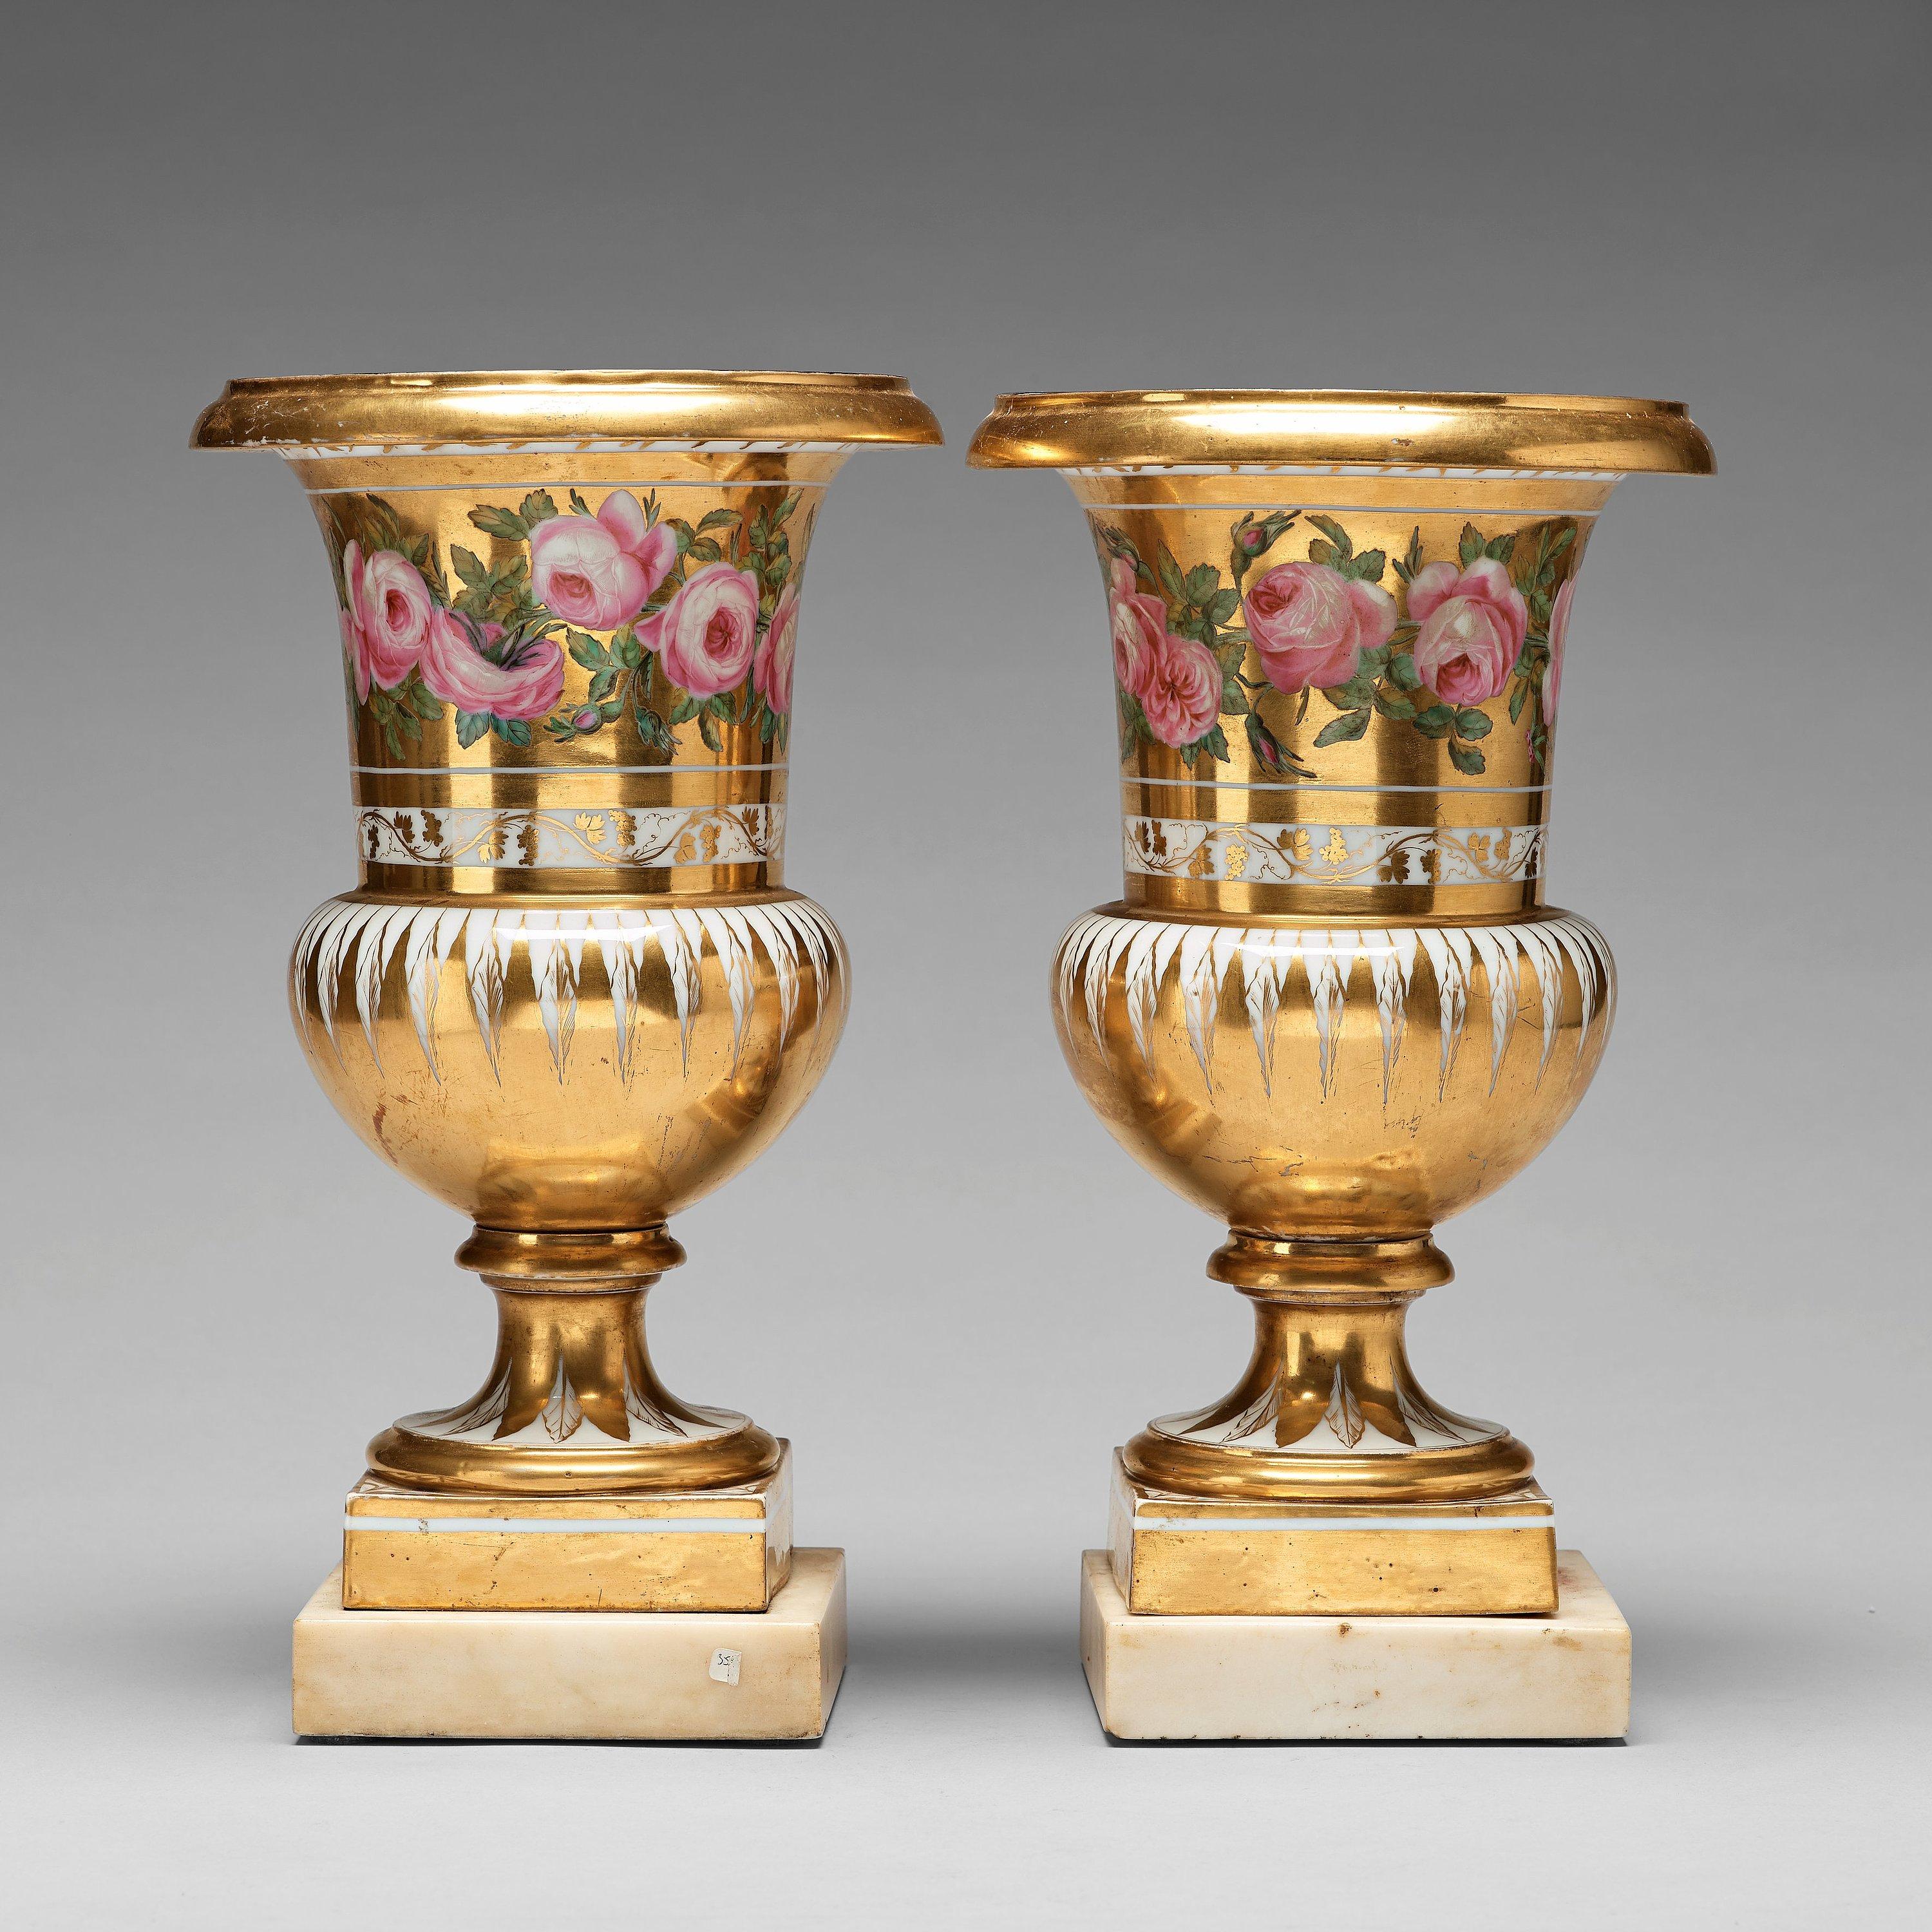 Empire Pair of French Porcelain vases signed Baigol, Limoges. ca 1820.